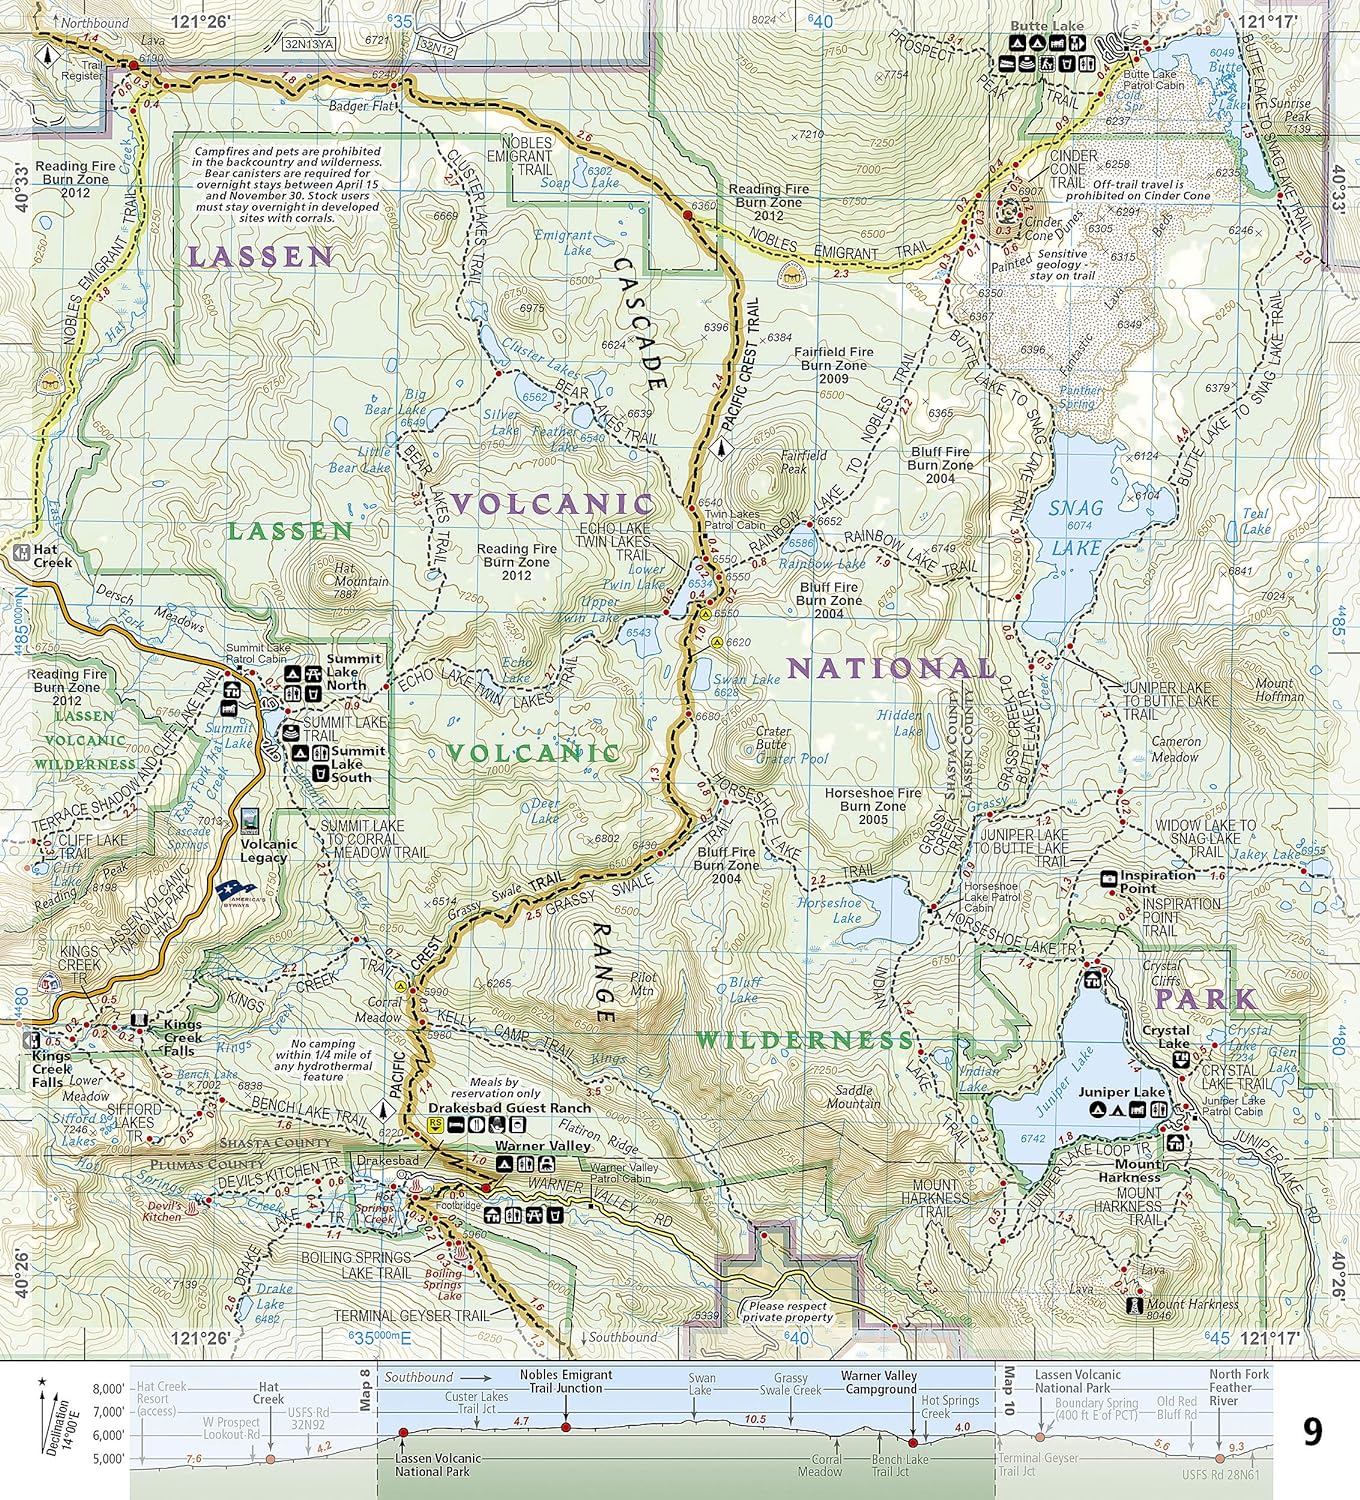 Pacific Crest Trail: Shasta and Lassen Map [Castle Crags to Sierra Buttes] (National Geographic Topographic Map Guide, 1007)     Map – Illustrated, January 1, 2022